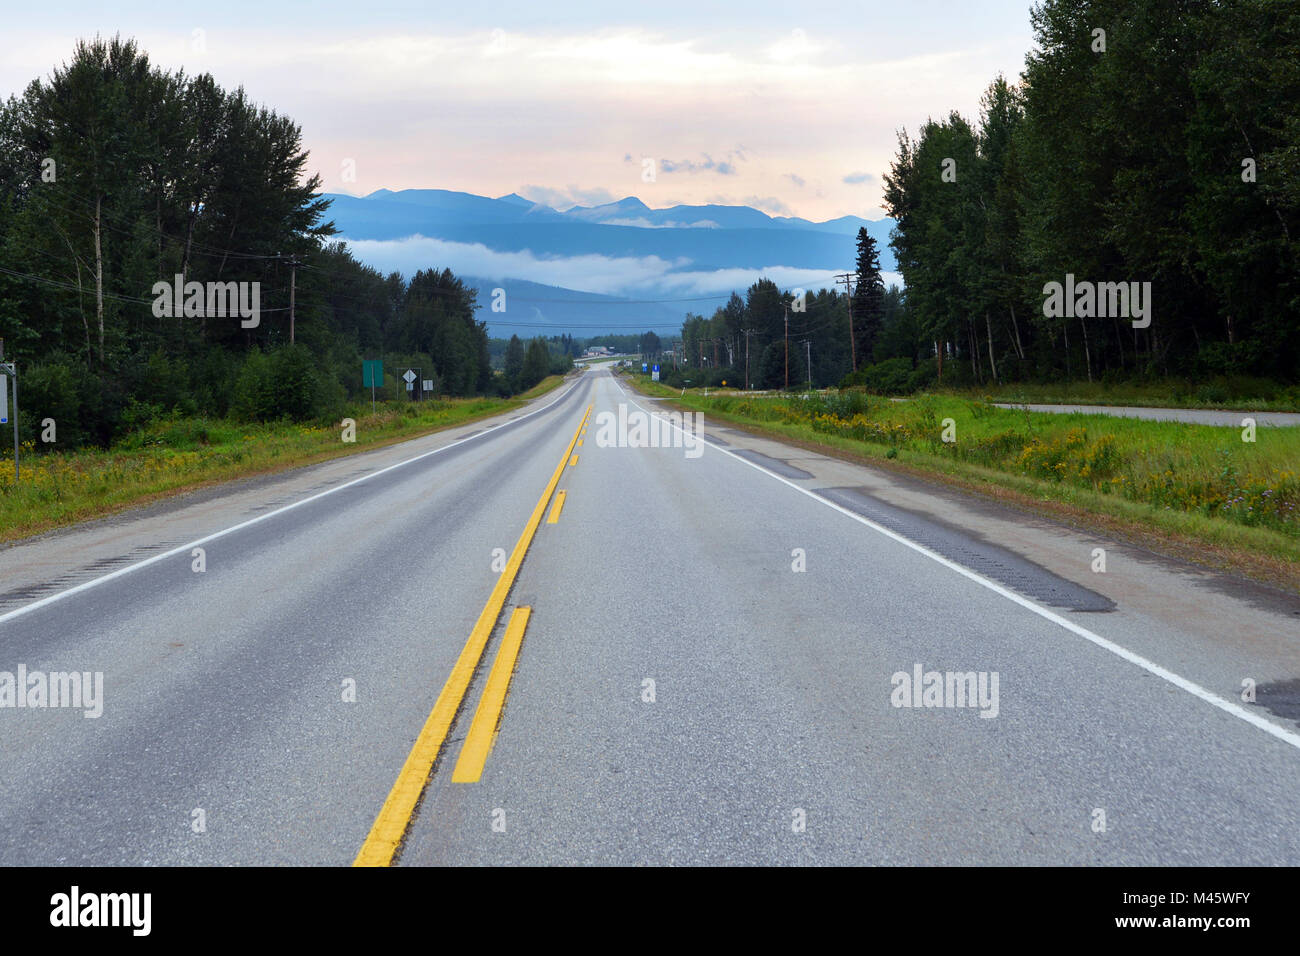 Empty road leading to Fraser Fort George, Canadian Rockies, BC Stock Photo